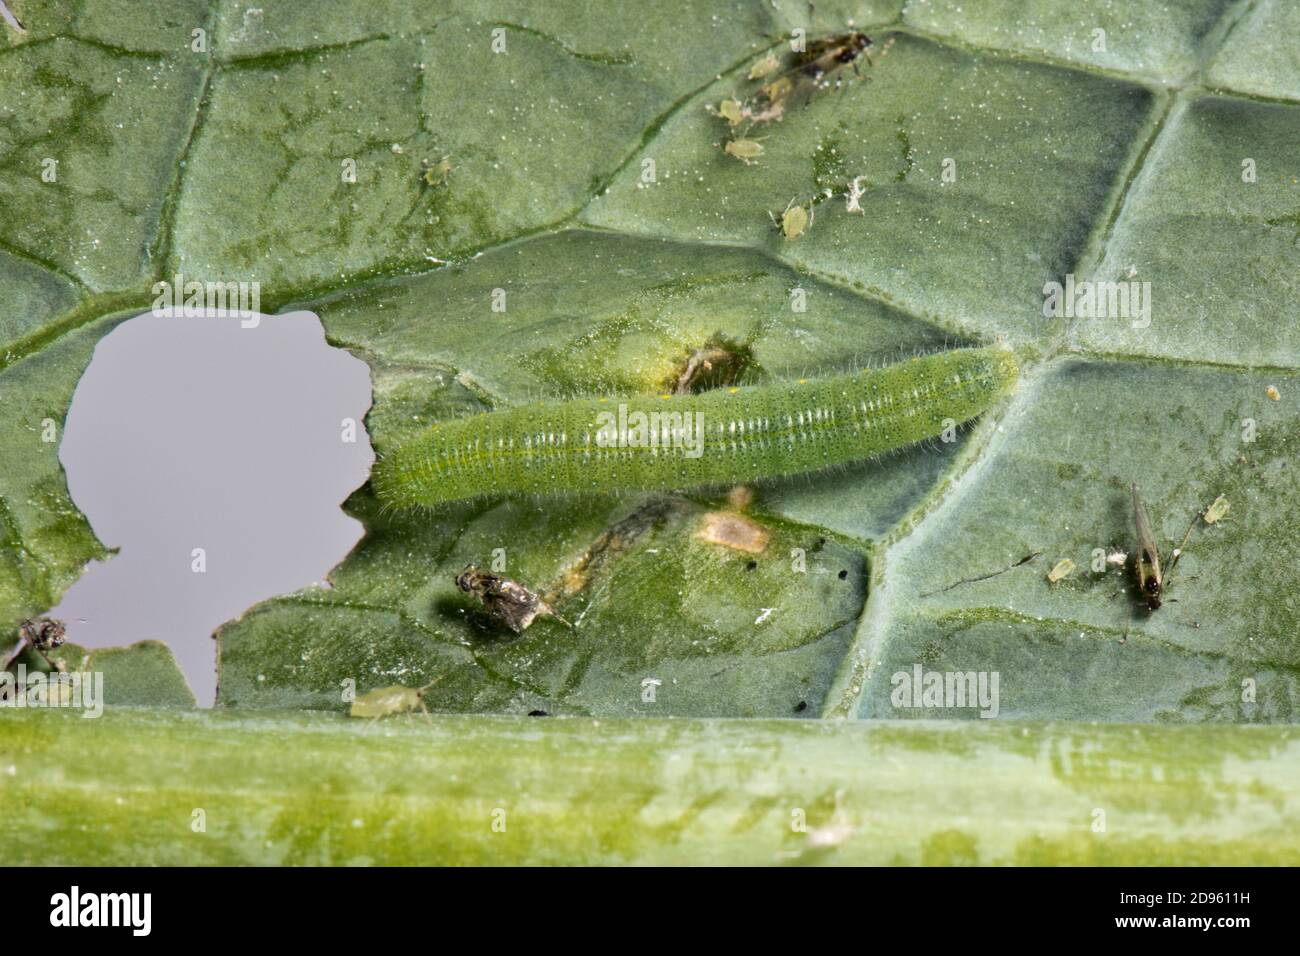 Late instar small white butterfly (Pieris rapae) caterpillar with alate mealy cabbage aphids and young feeding on a cabbage leaf, Berkshire, July Stock Photo